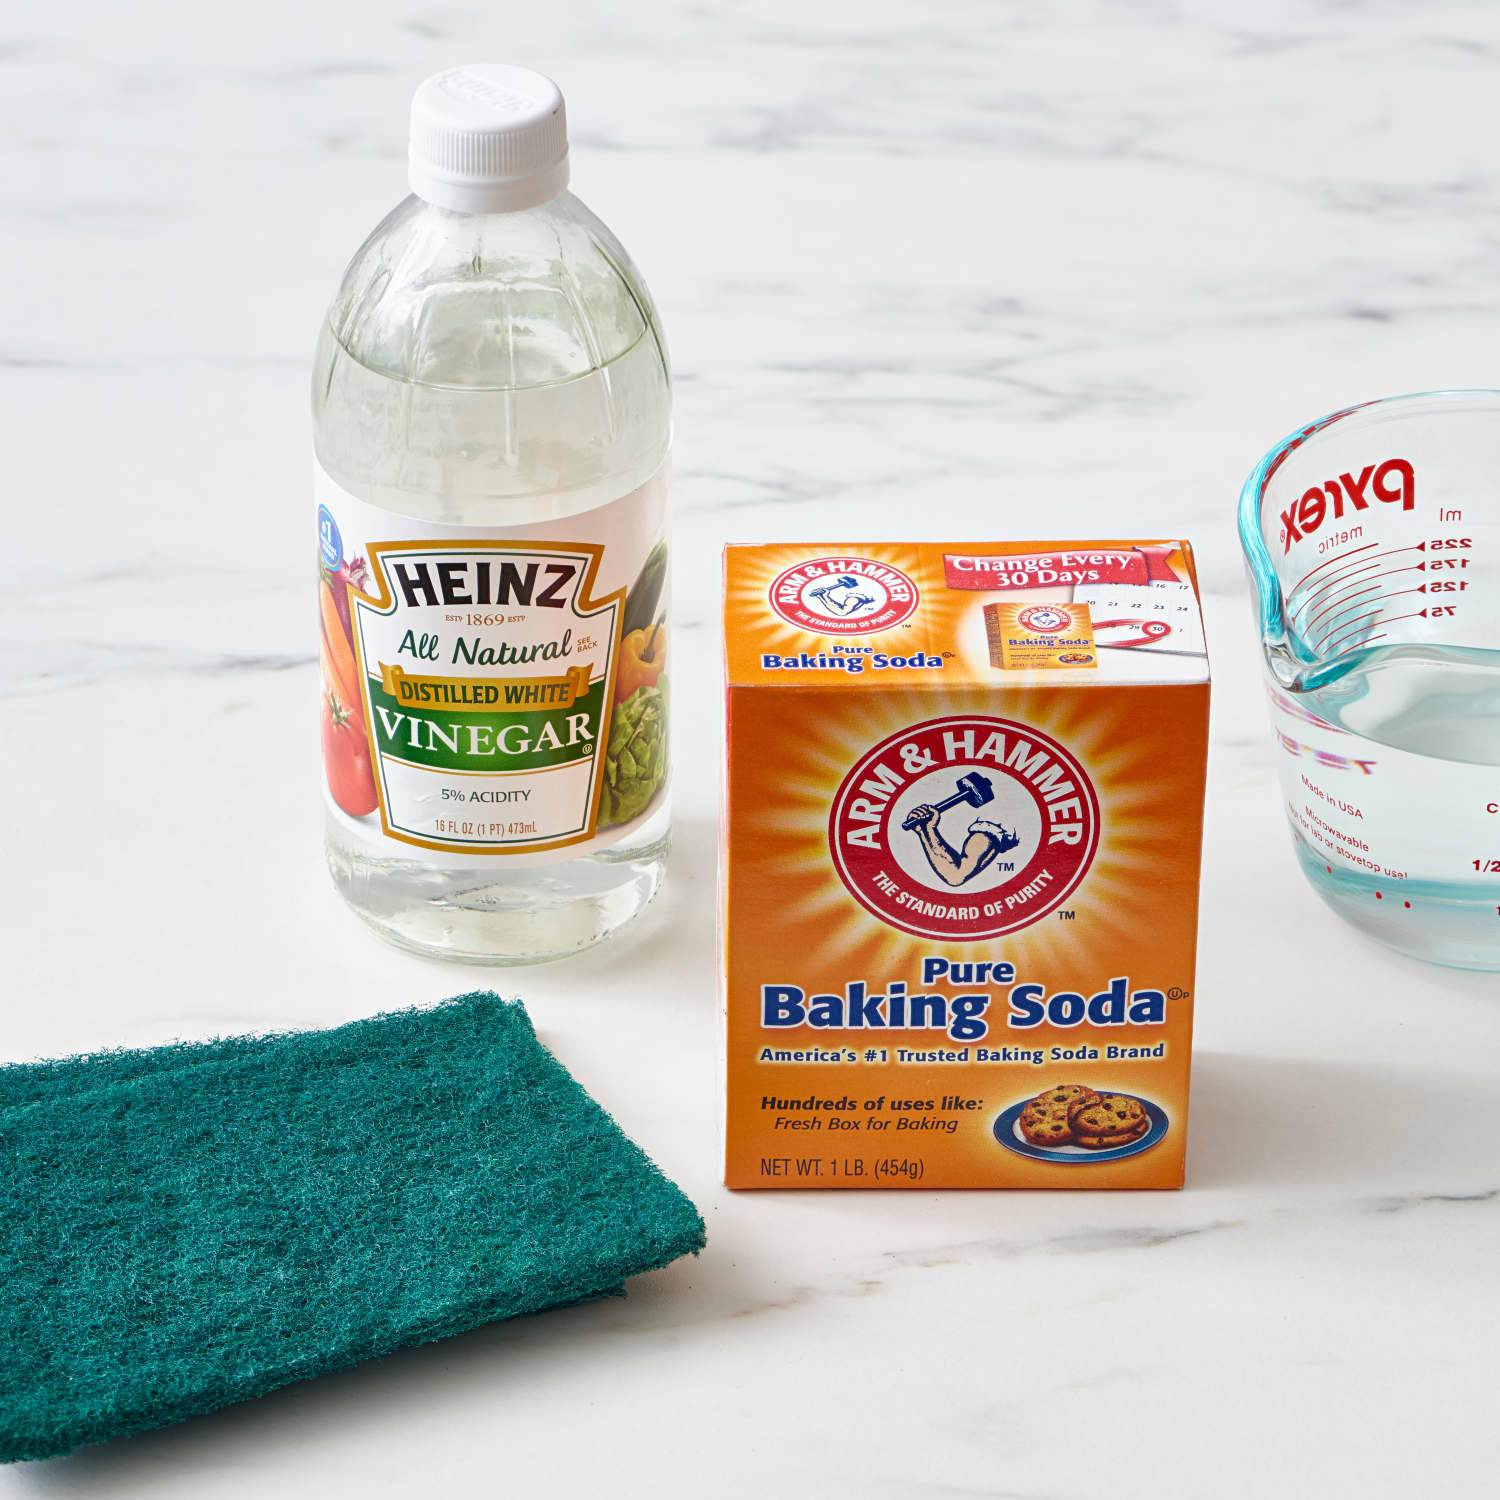 How To Clean A Drain With Baking Soda And Vinegar